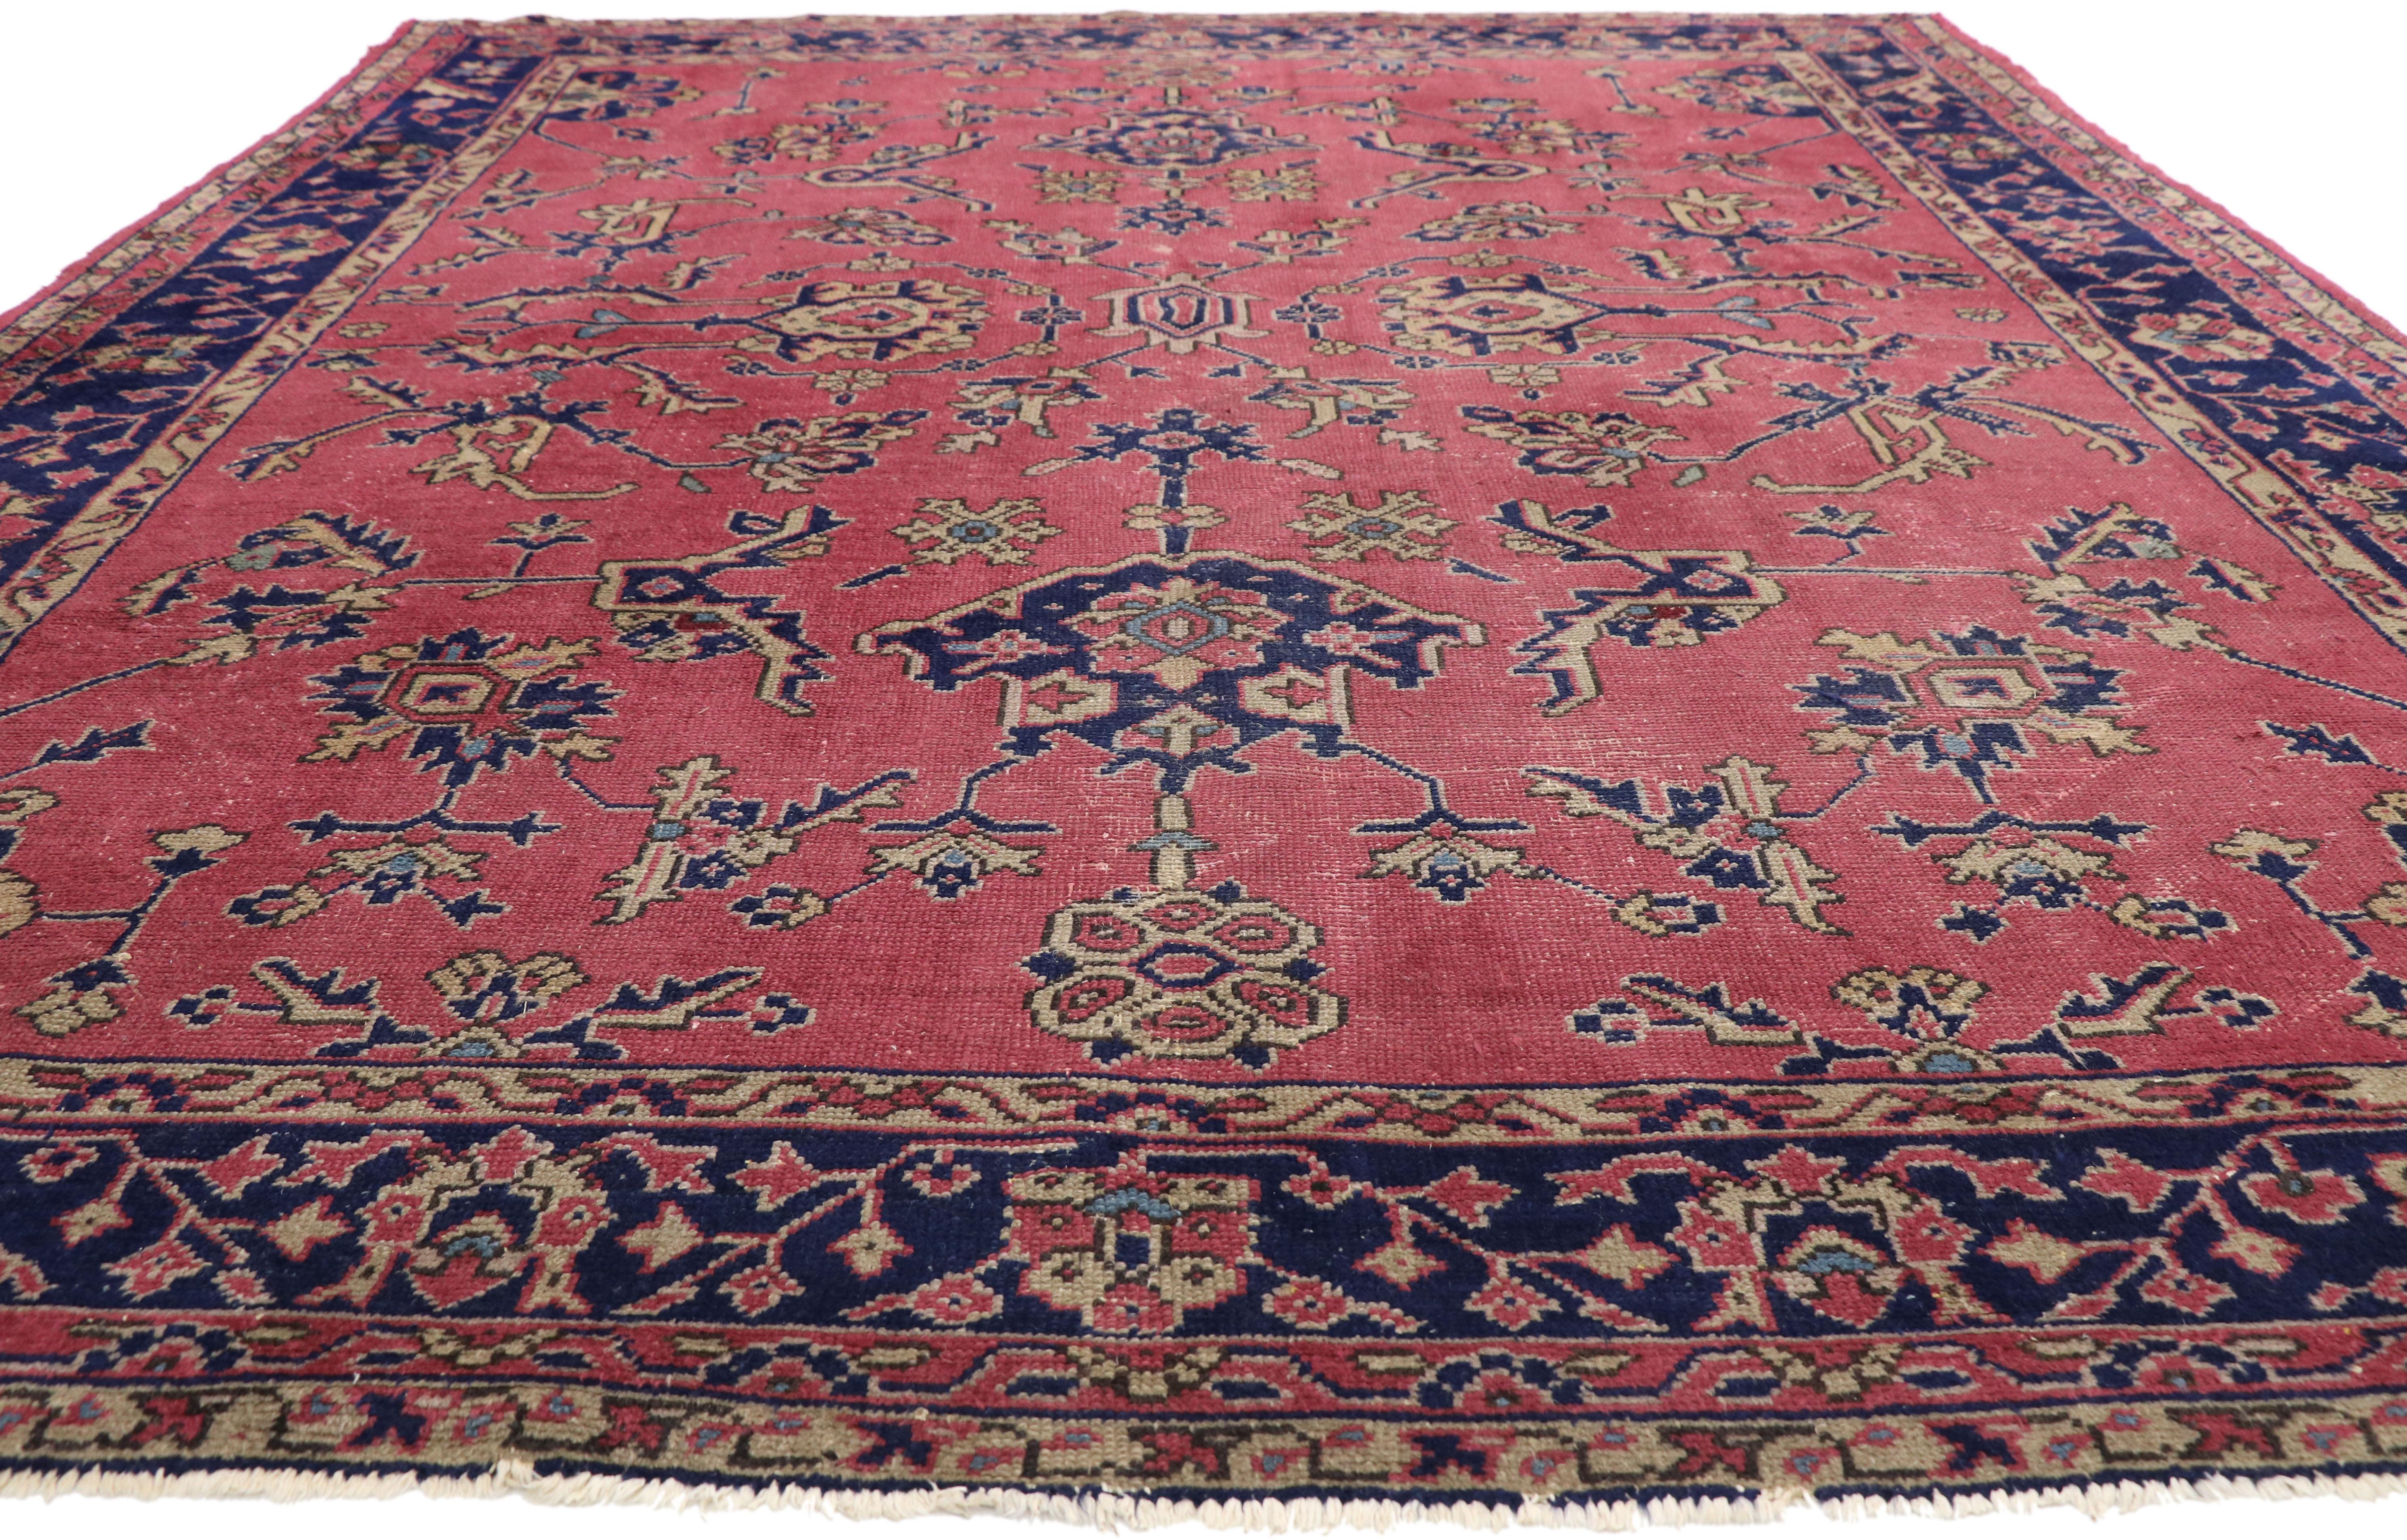 Hand-Knotted Distressed Antique Turkish Sparta Rug with Industrial Romantic Venetian Style